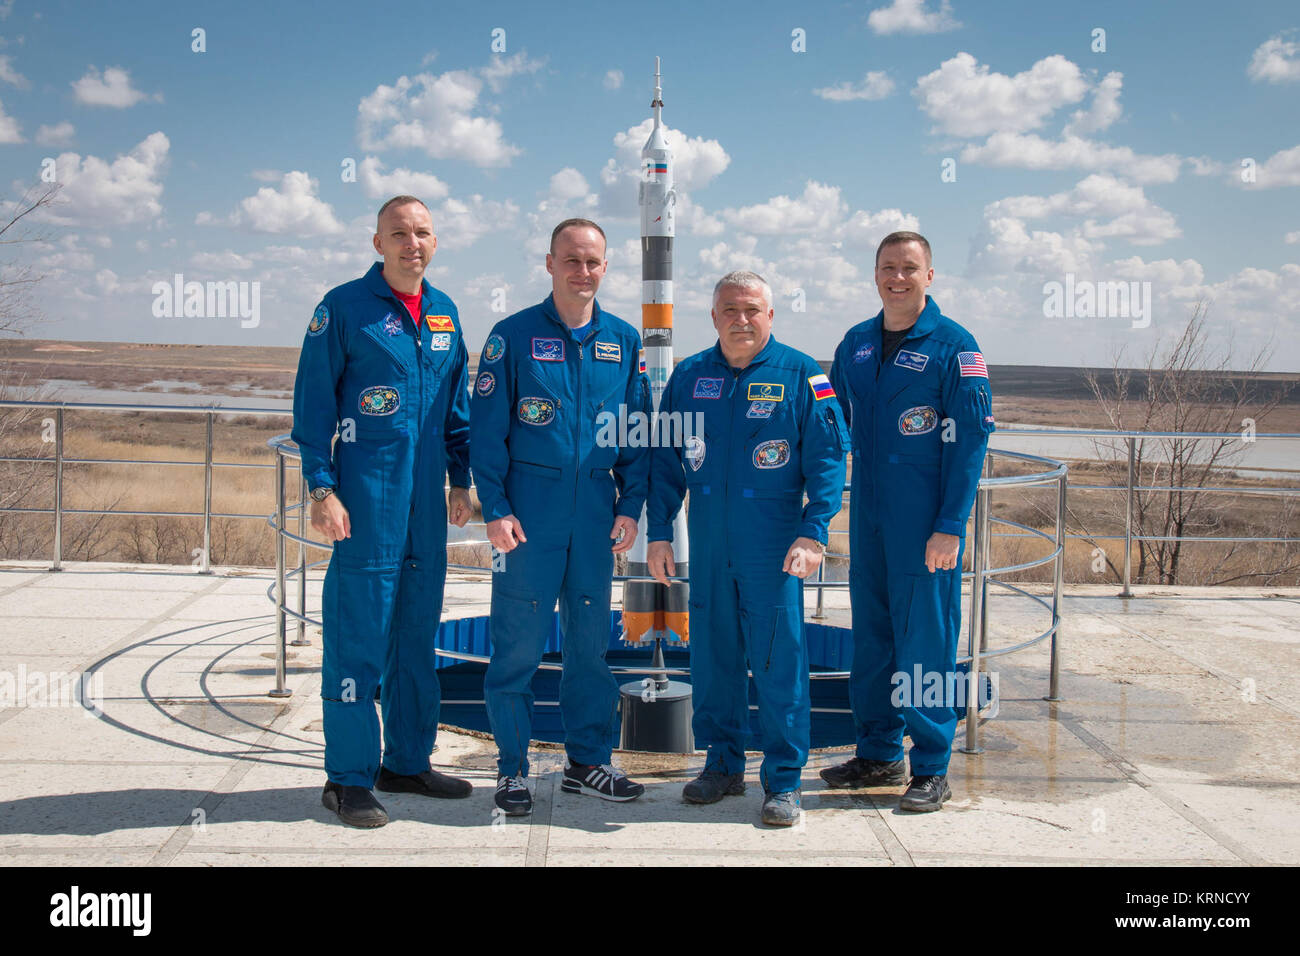 At the Cosmonaut Hotel crew quarters in Baikonur, Kazakhstan, the Expedition 51 prime and backup crewmembers pose for pictures April 13 as part of traditional pre-launch activities. From left to right are backup crewmembers Randy Bresnik of NASA and Sergey Ryazanskiy of the Russian Federal Space Agency (Roscosmos) and prime crewmembers Fyodor Yurchikhin of Roscosmos and Jack Fischer of NASA. Fischer and Yurchikhin will liftoff April 20 from the Baikonur Cosmodrome on the Soyuz MS-04 spacecraft for a four and a half month mission on the International Space Station.  NASA/Victor Zelentsov Soyuz  Stock Photo